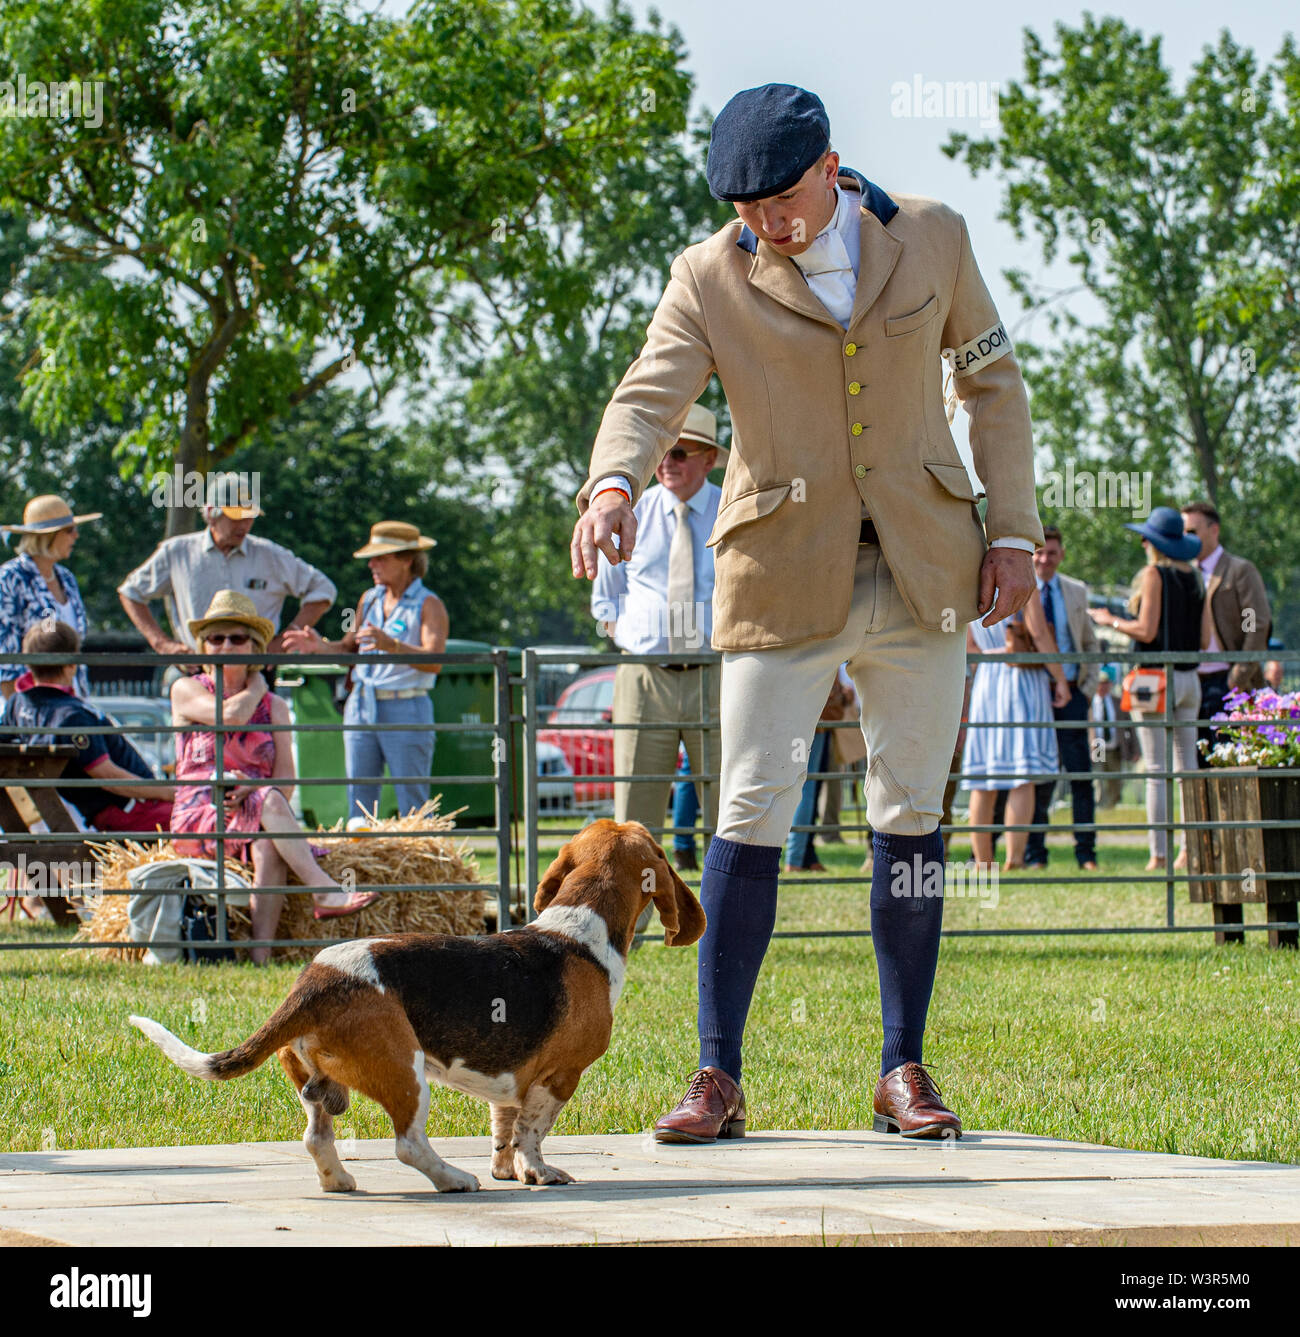 The annual Festival of Hunting is a one-day event boasting the greatest gathering of hounds in the country. Harriers, Beagles, Basset Hounds, Draghounds and Bloodhounds will be competing along with displays of fell hounds, coursing dogs, and the popular Sealey Terriers. Credit: Matt Limb OBE/Alamy Live News Stock Photo